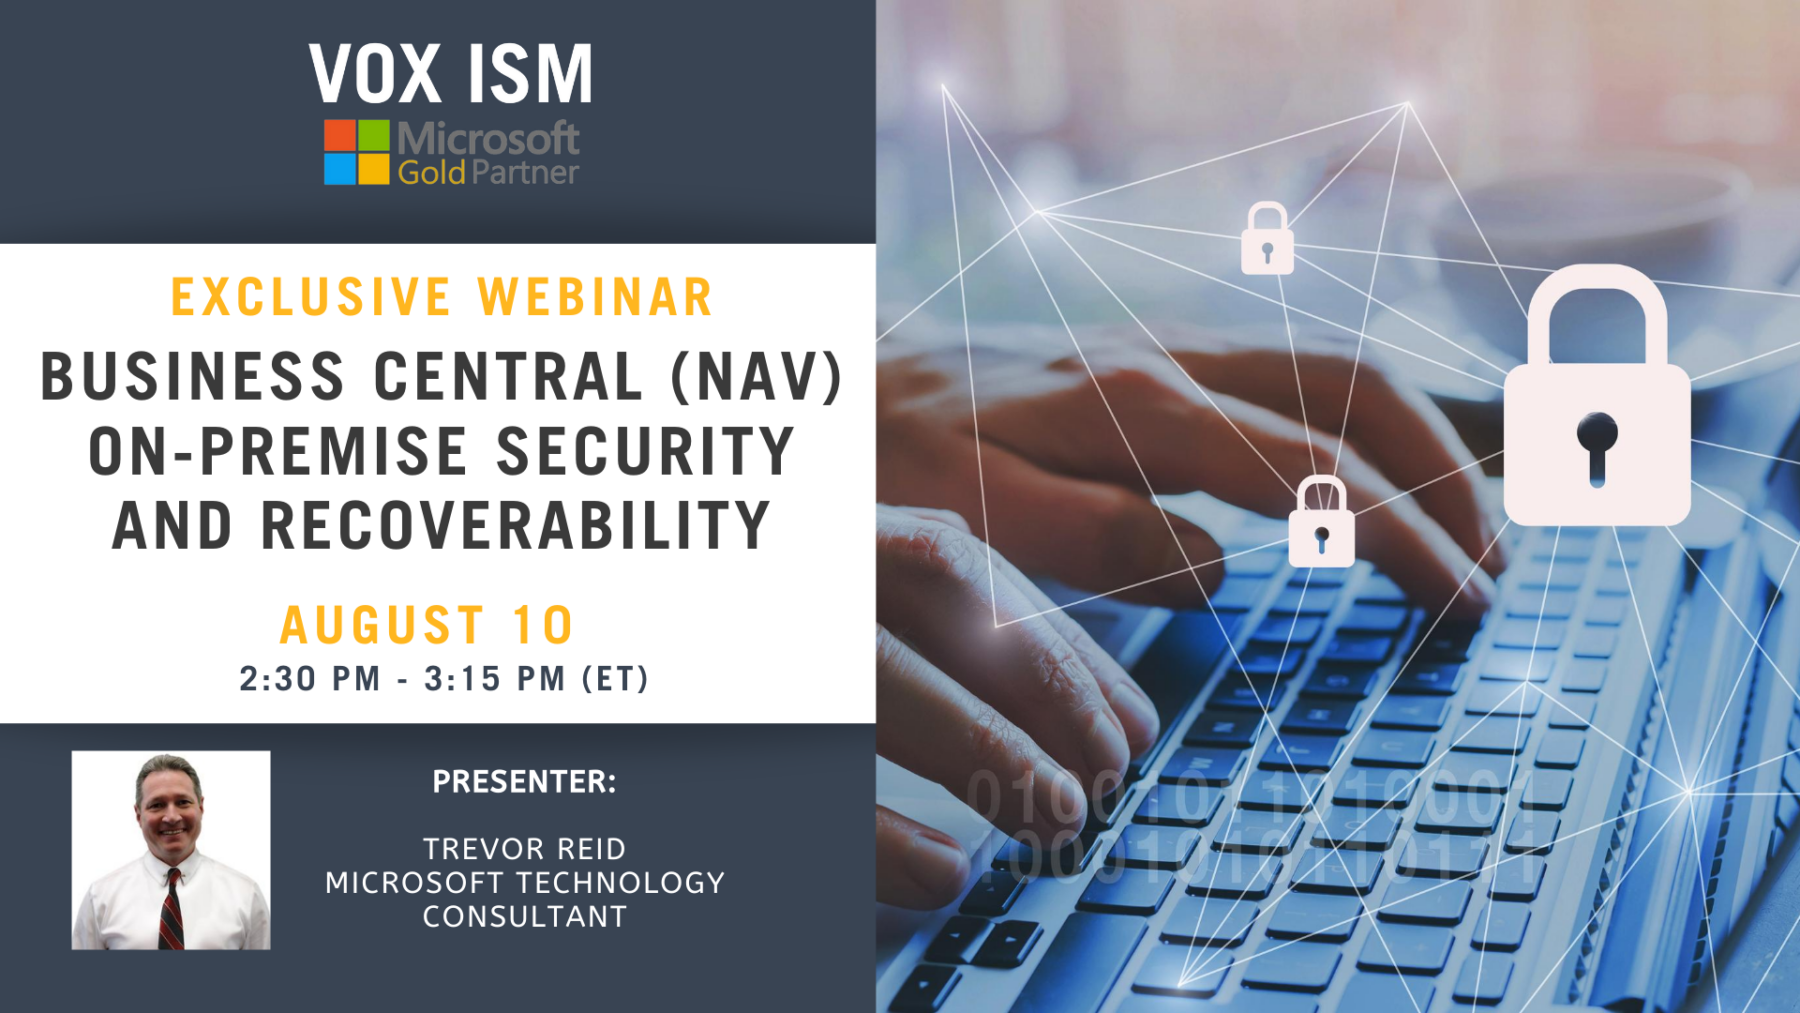 Workshop: Business Central\NAV on-premise security and recoverability - August 10 - Webinar